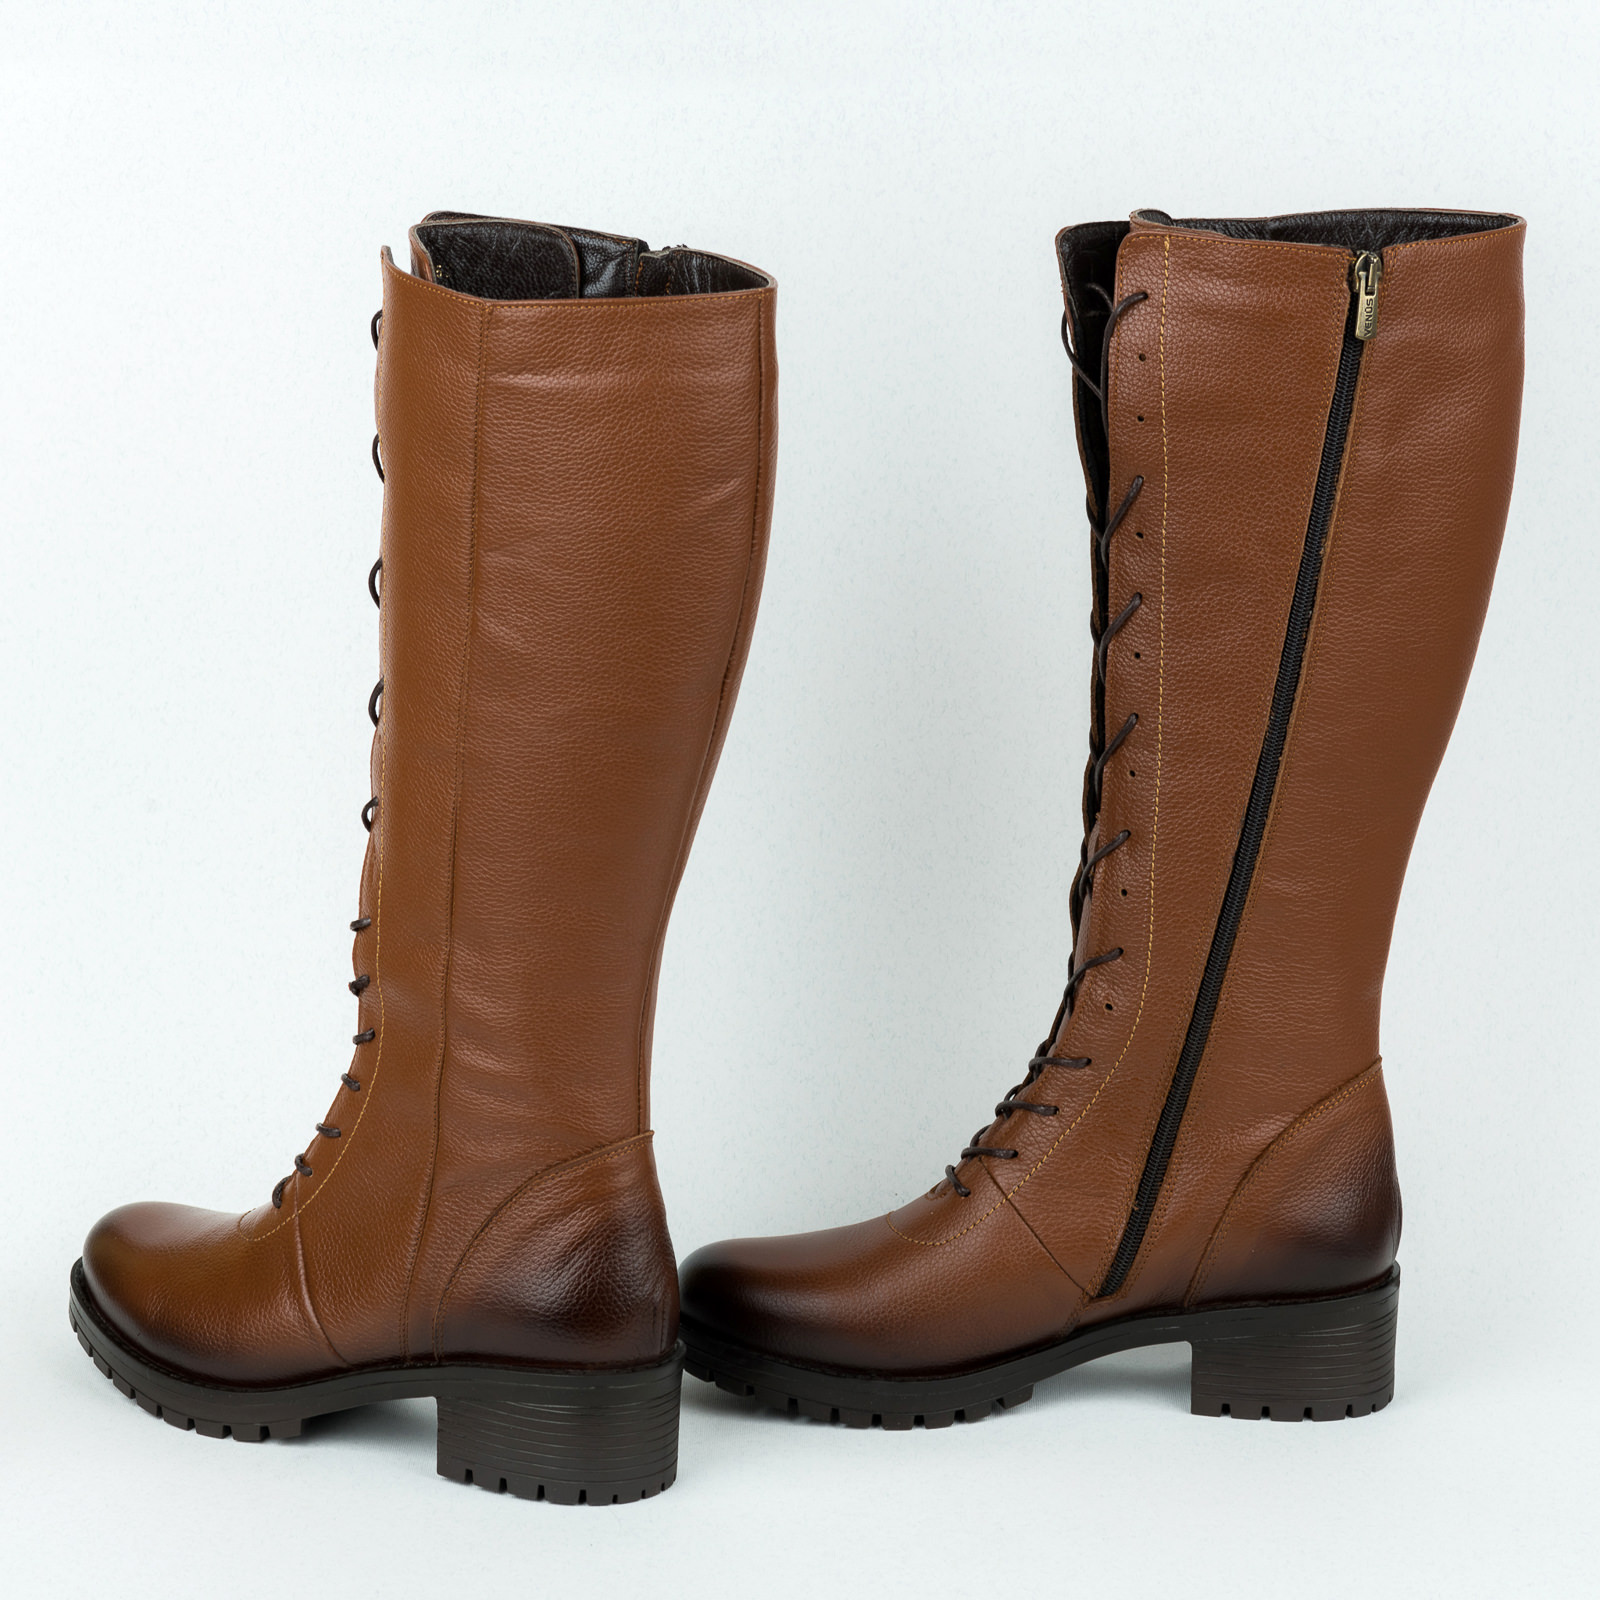 Leather boots B447 - CAMEL